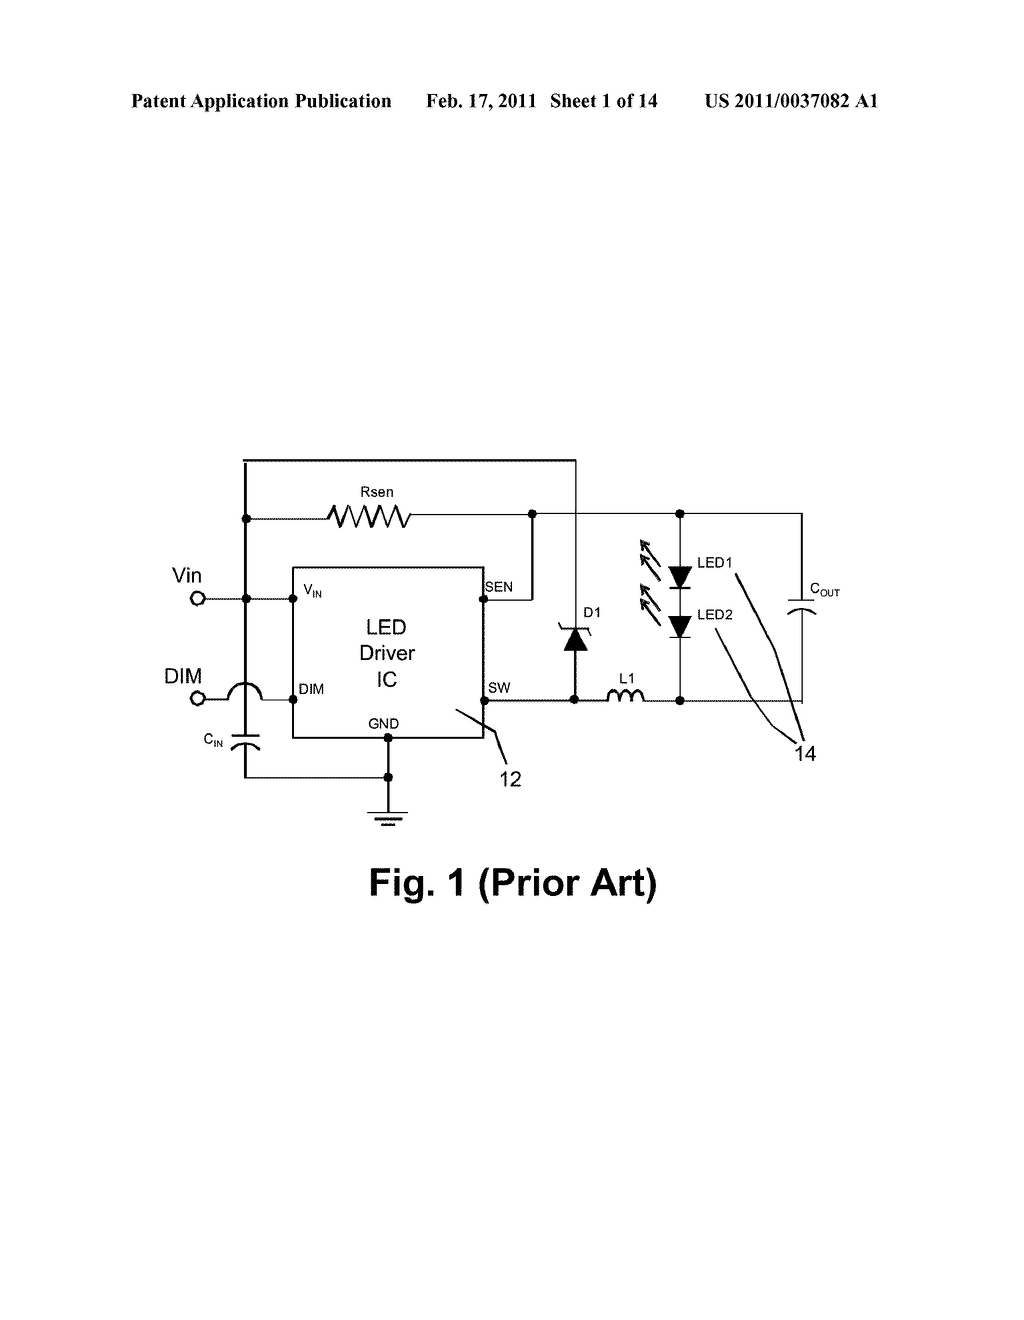 Smart Integrated Semiconductor Light Emitting System Including Light Emitting Diodes And Application Specific Integrated Circuits (ASIC) - diagram, schematic, and image 02